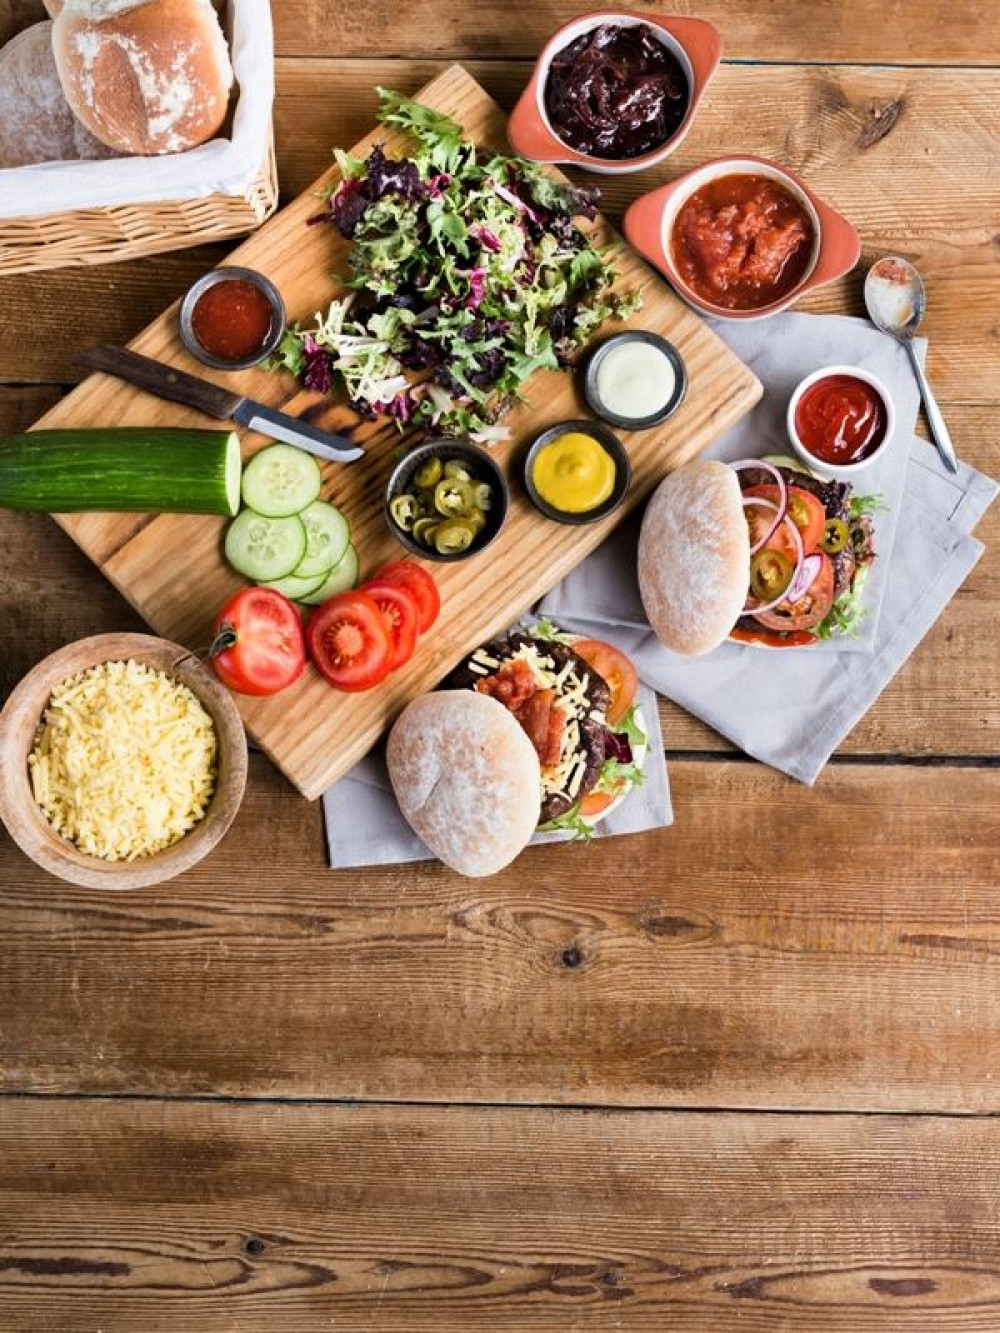 Food laid out on wooden table